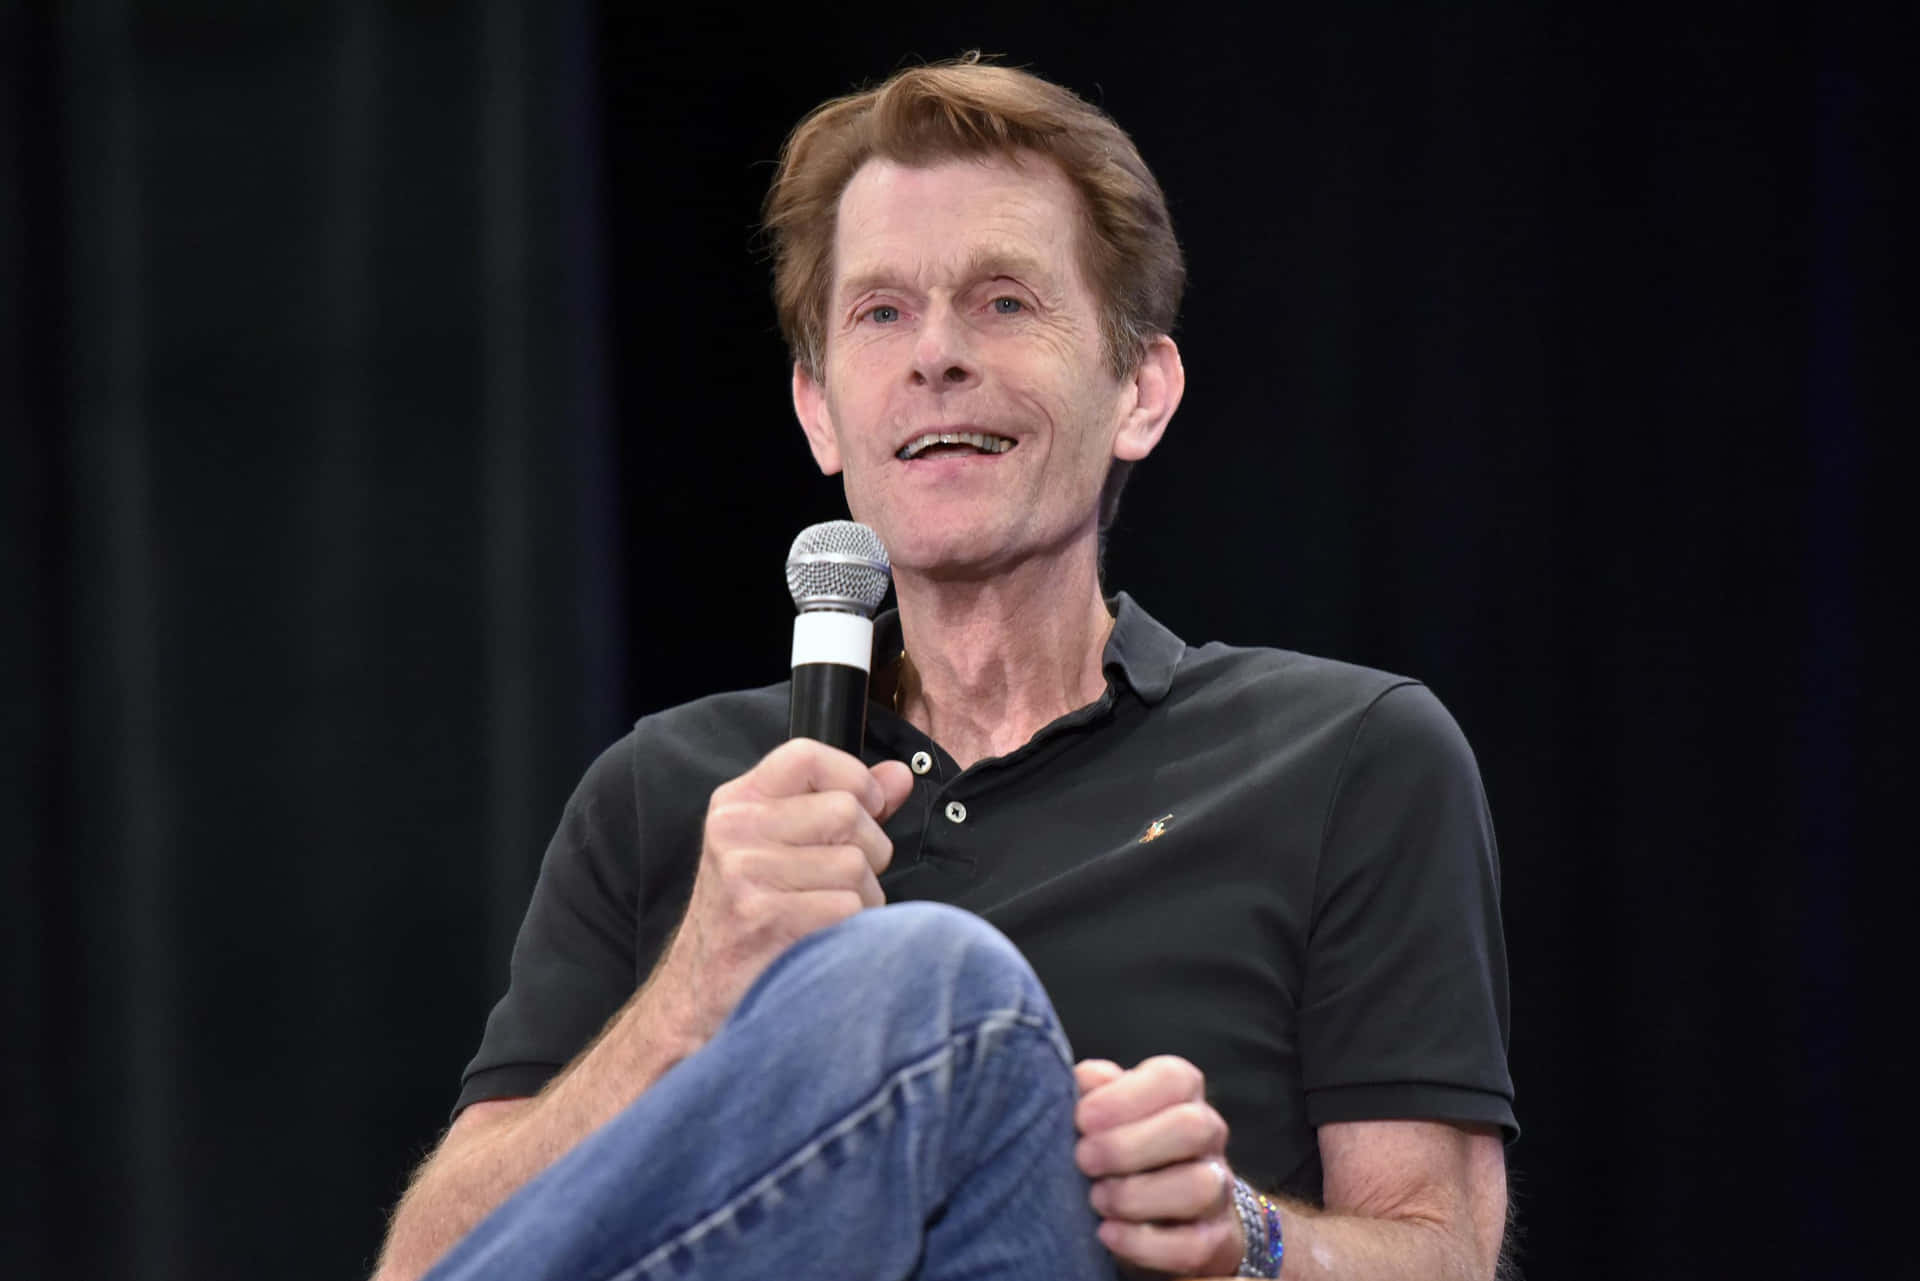 Kevin Conroy at an event, smiling and posing for the camera Wallpaper